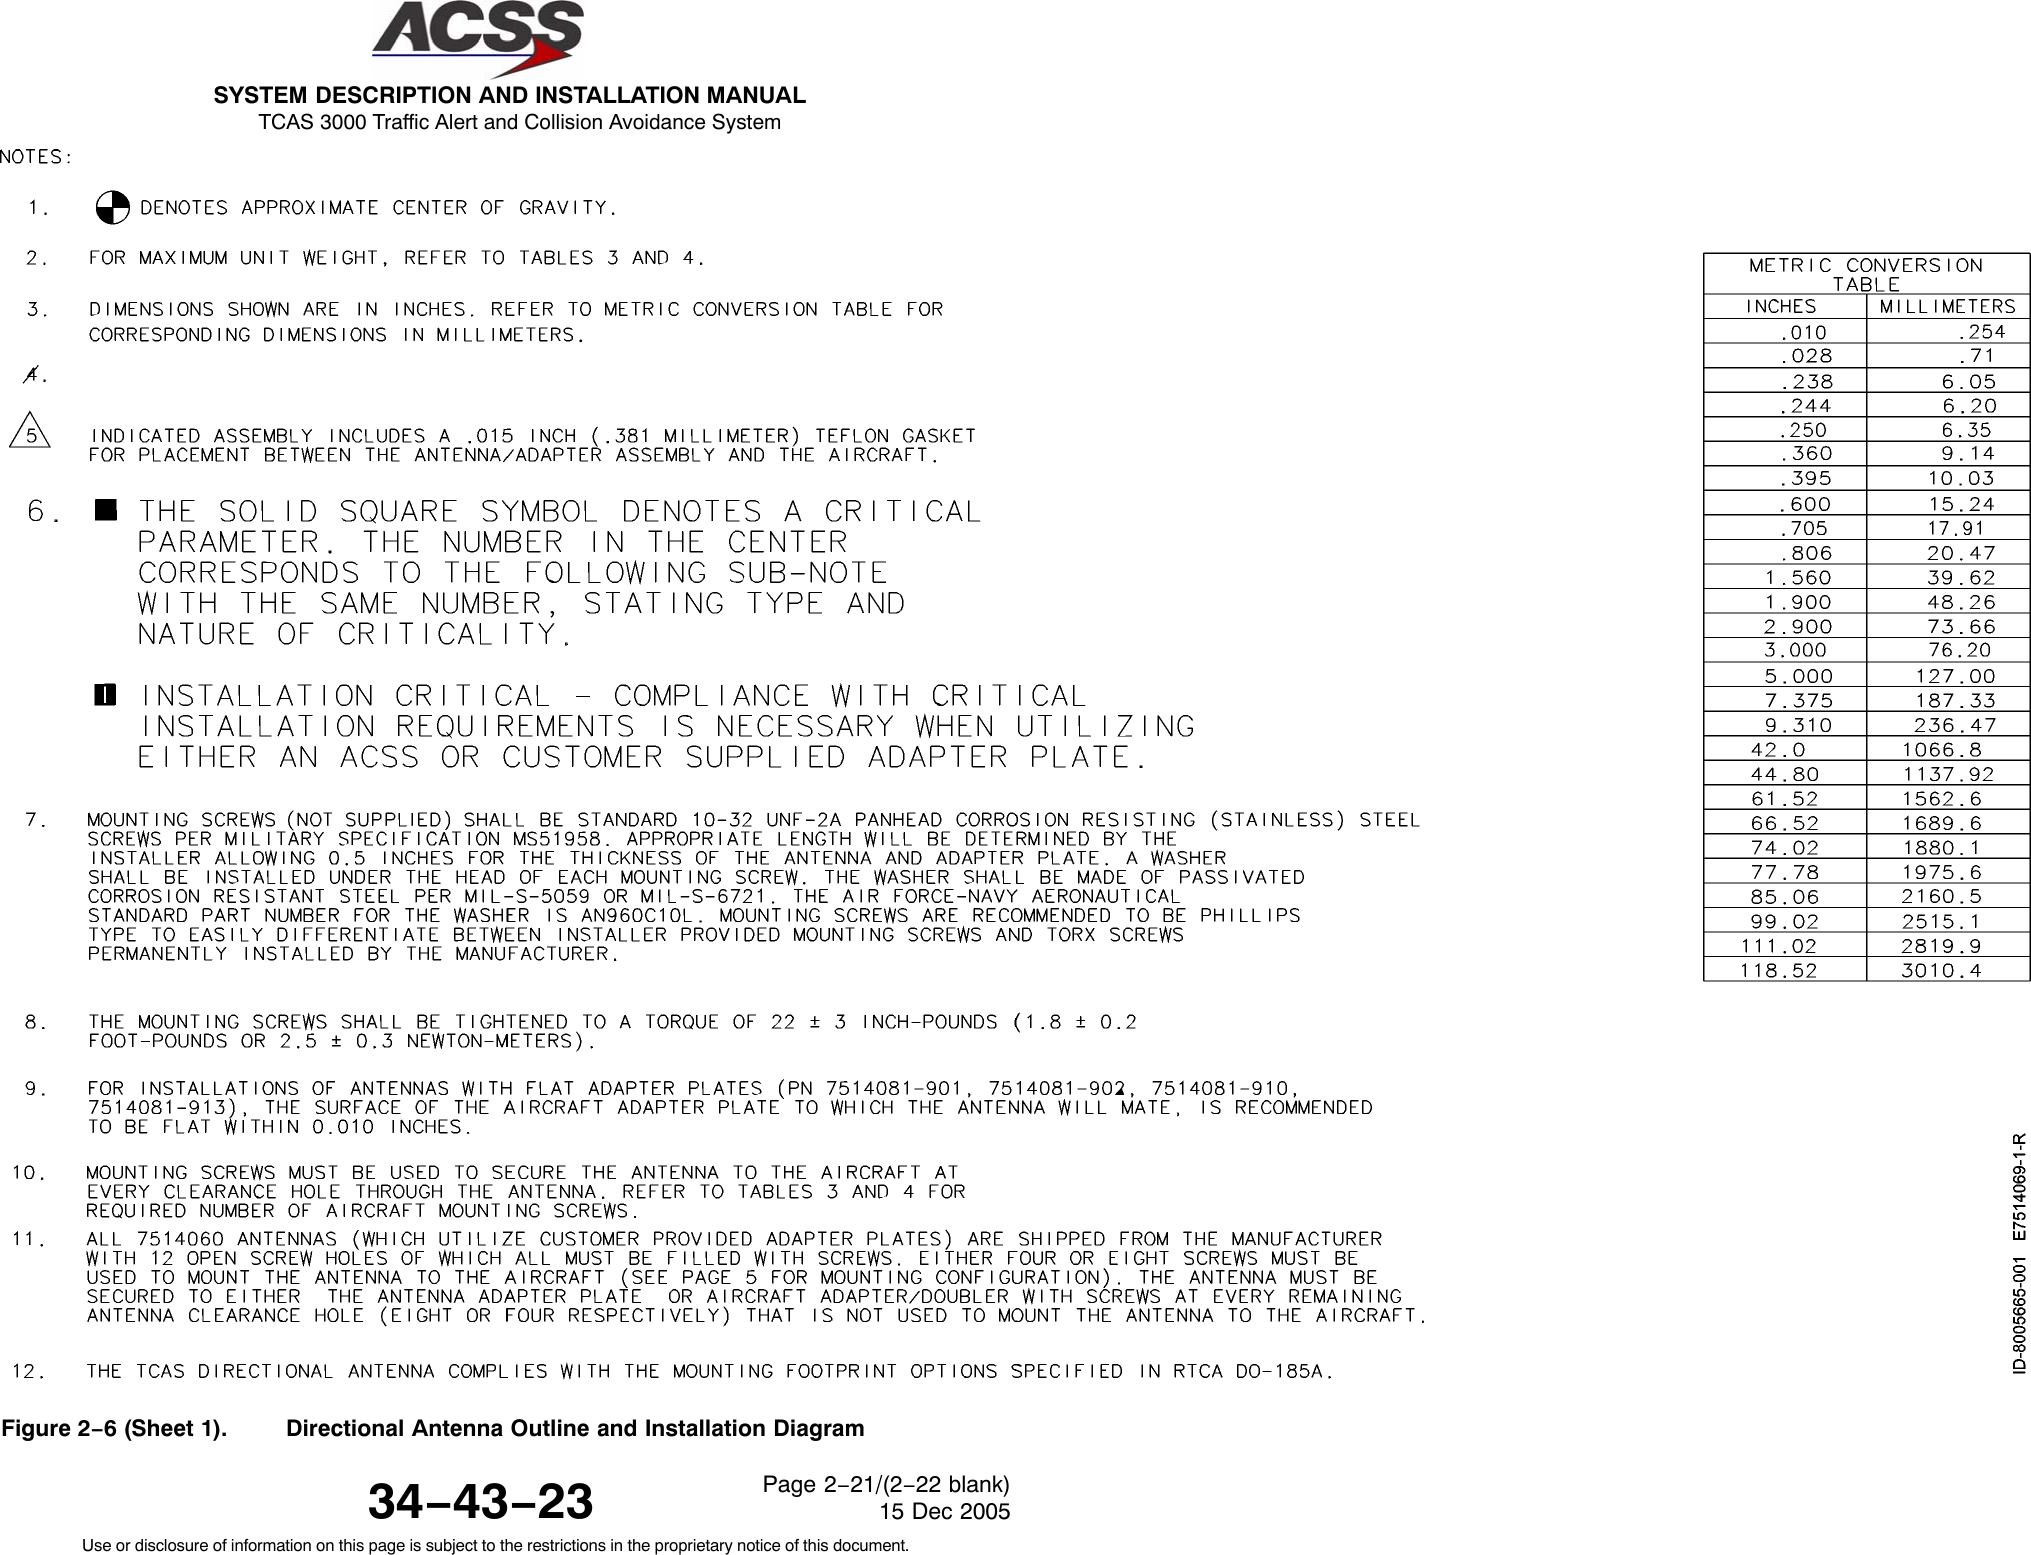  SYSTEM DESCRIPTION AND INSTALLATION MANUAL TCAS 3000 Traffic Alert and Collision Avoidance System34−43−23Use or disclosure of information on this page is subject to the restrictions in the proprietary notice of this document.Page 2−21/(2−22 blank)15 Dec 2005Figure 2−6 (Sheet 1). Directional Antenna Outline and Installation Diagram